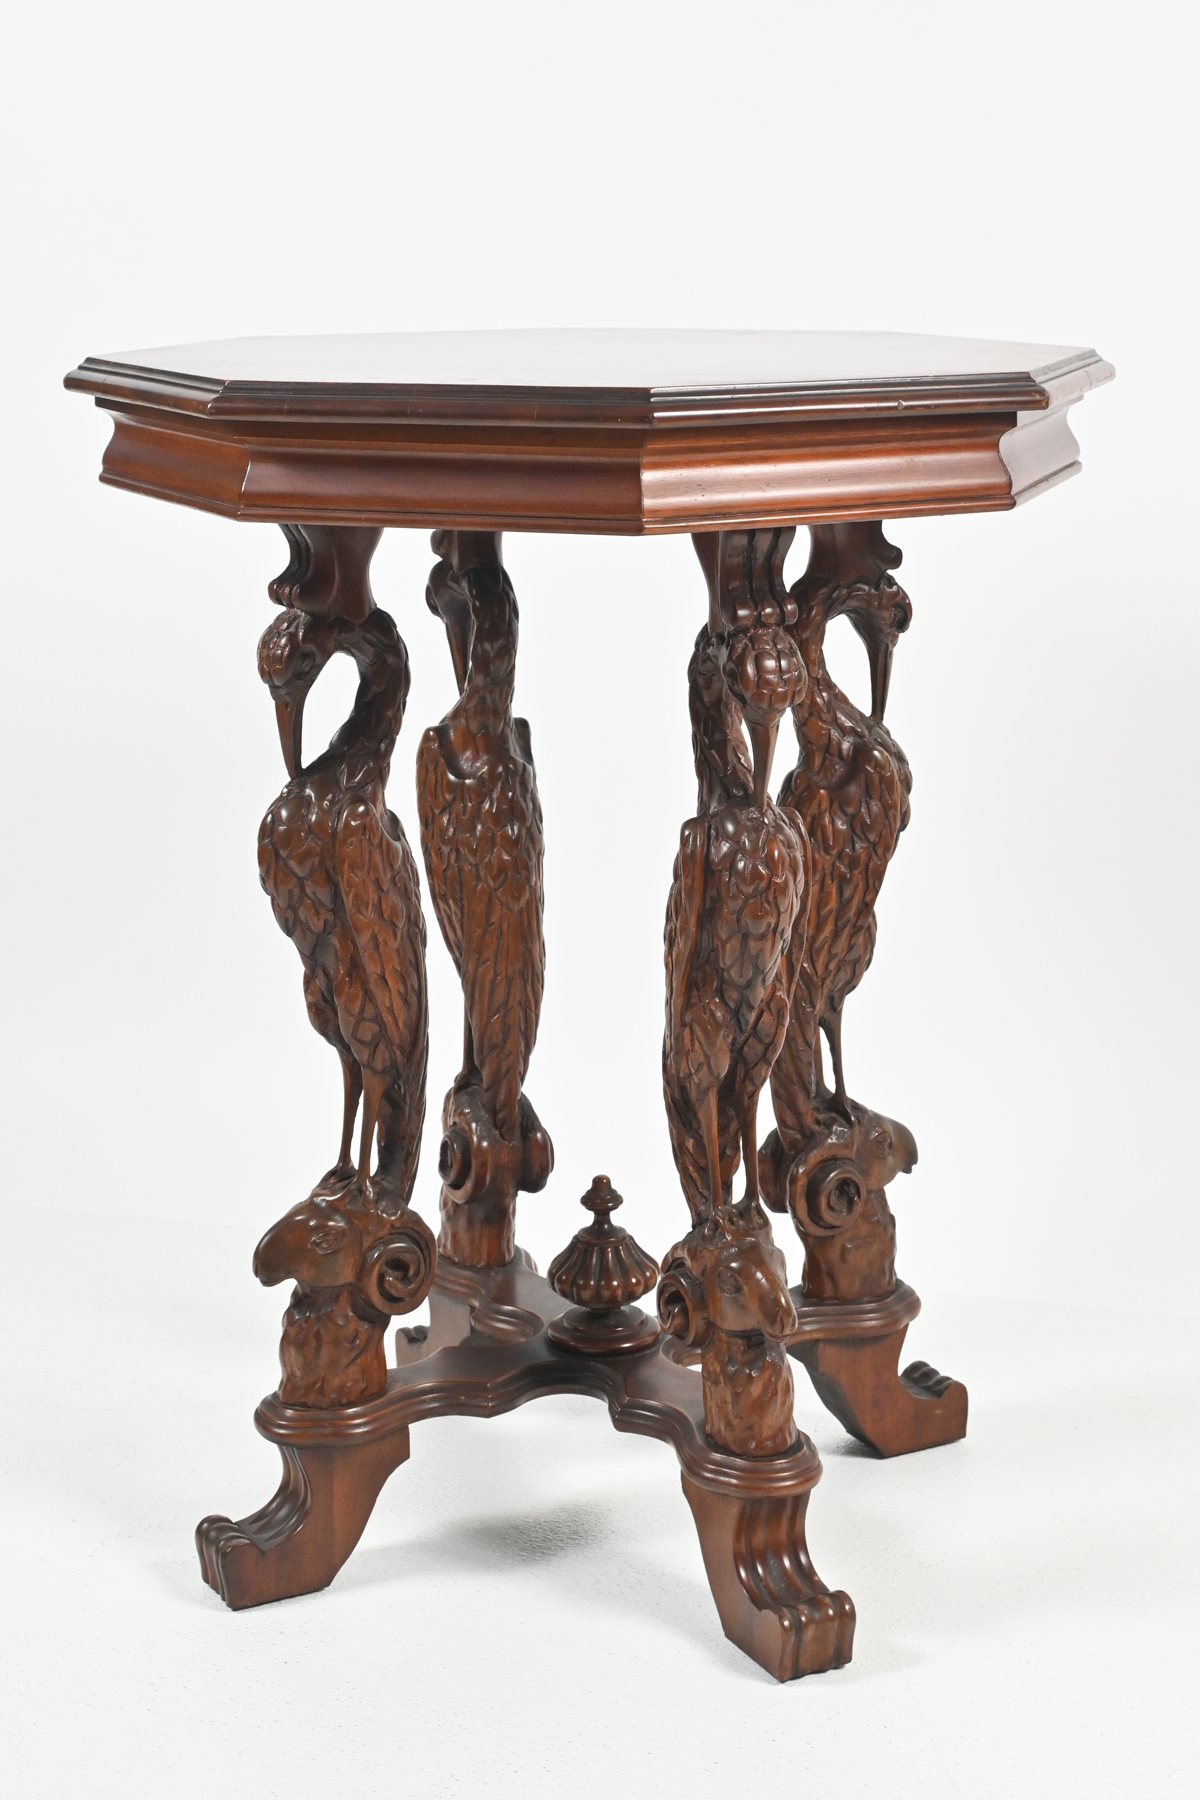 STORK RAM CARVED LAMP TABLE This 2ed448